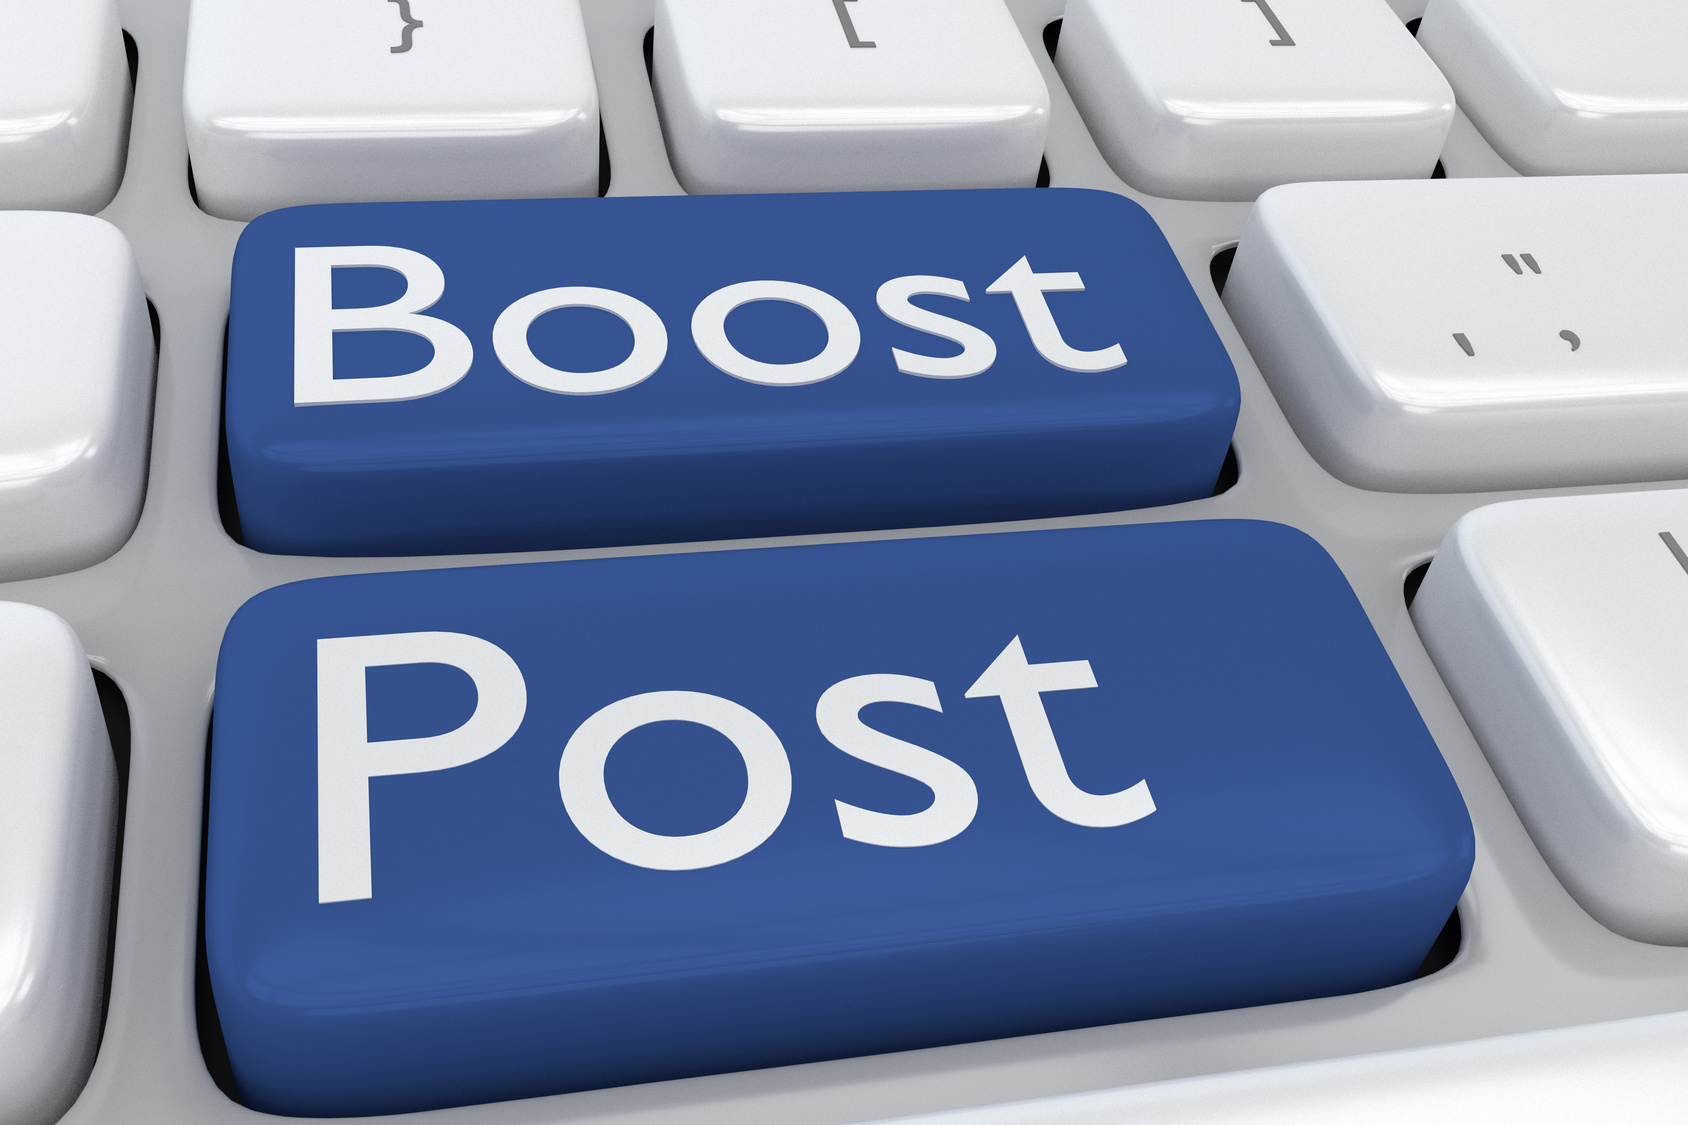 Take advantage of Facebook Boost Post - read these handy tips!